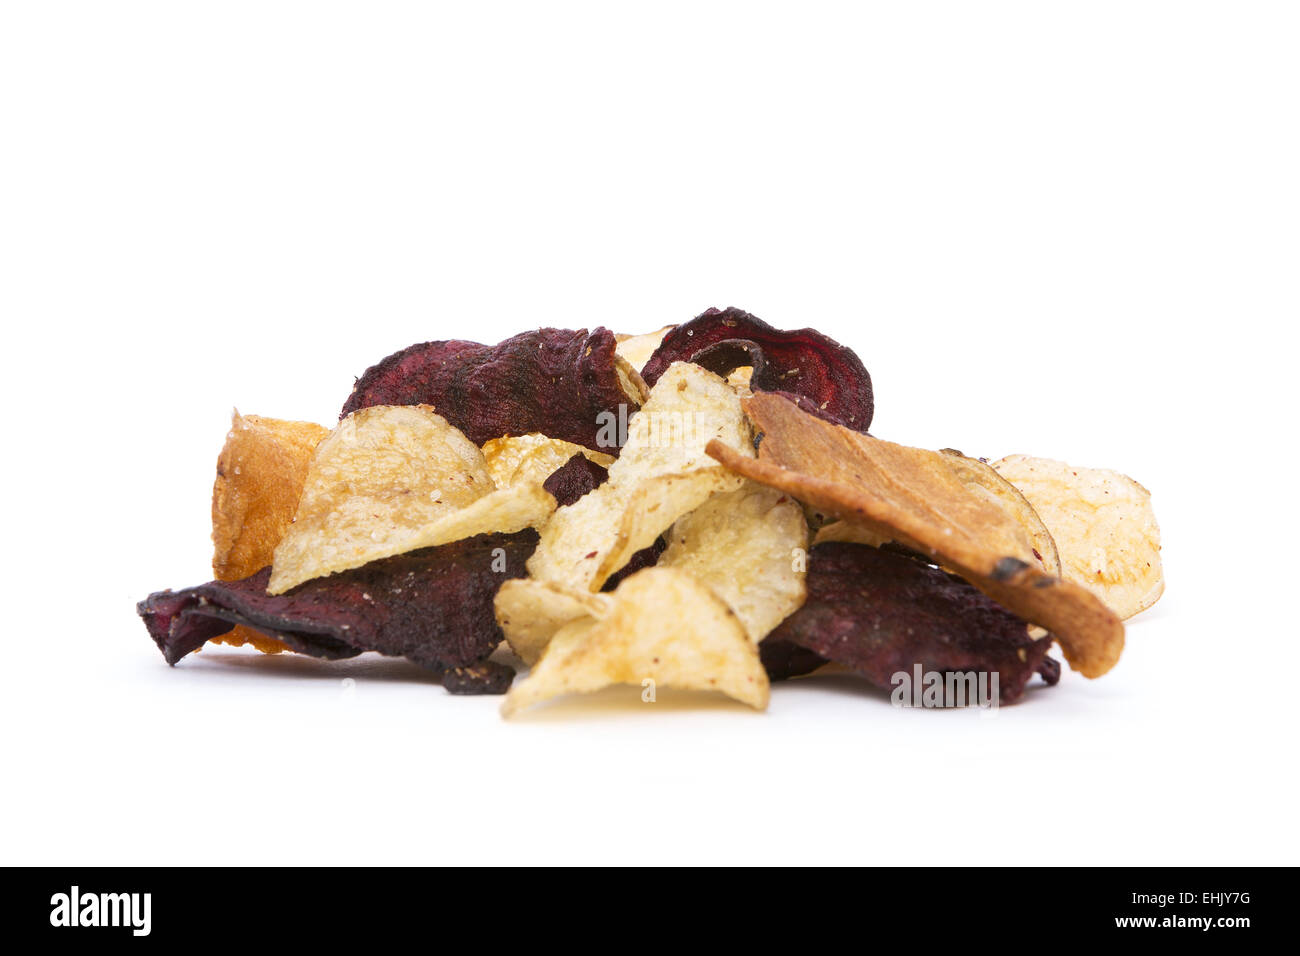 Side view of organic Root Vegetable Chips on white background. Stock Photo